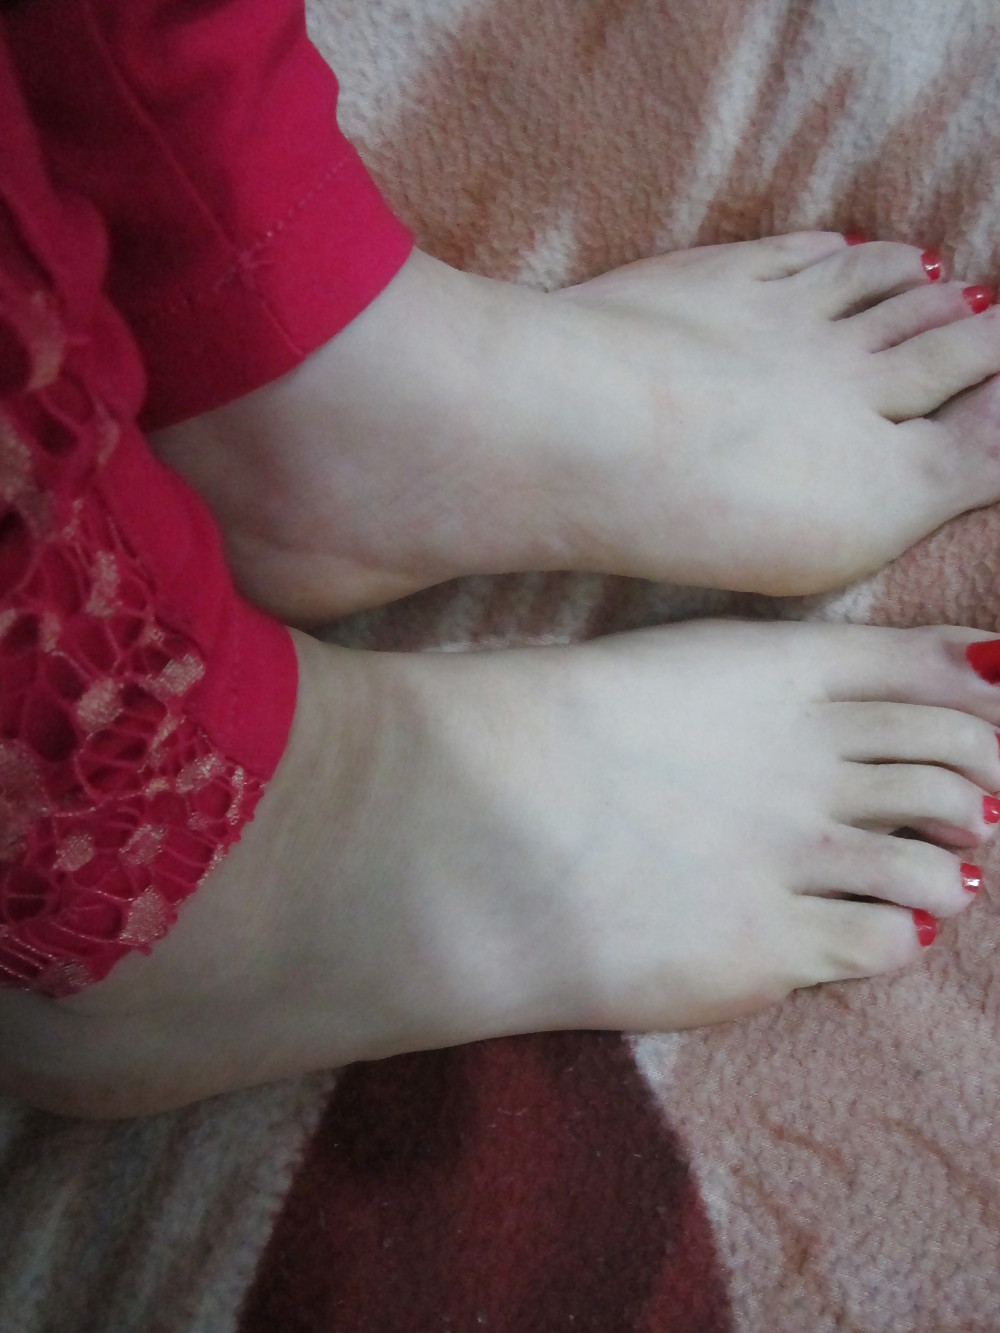 (1) My asian GF's feet, toes and soles! Chinese foot fetish! #21452143